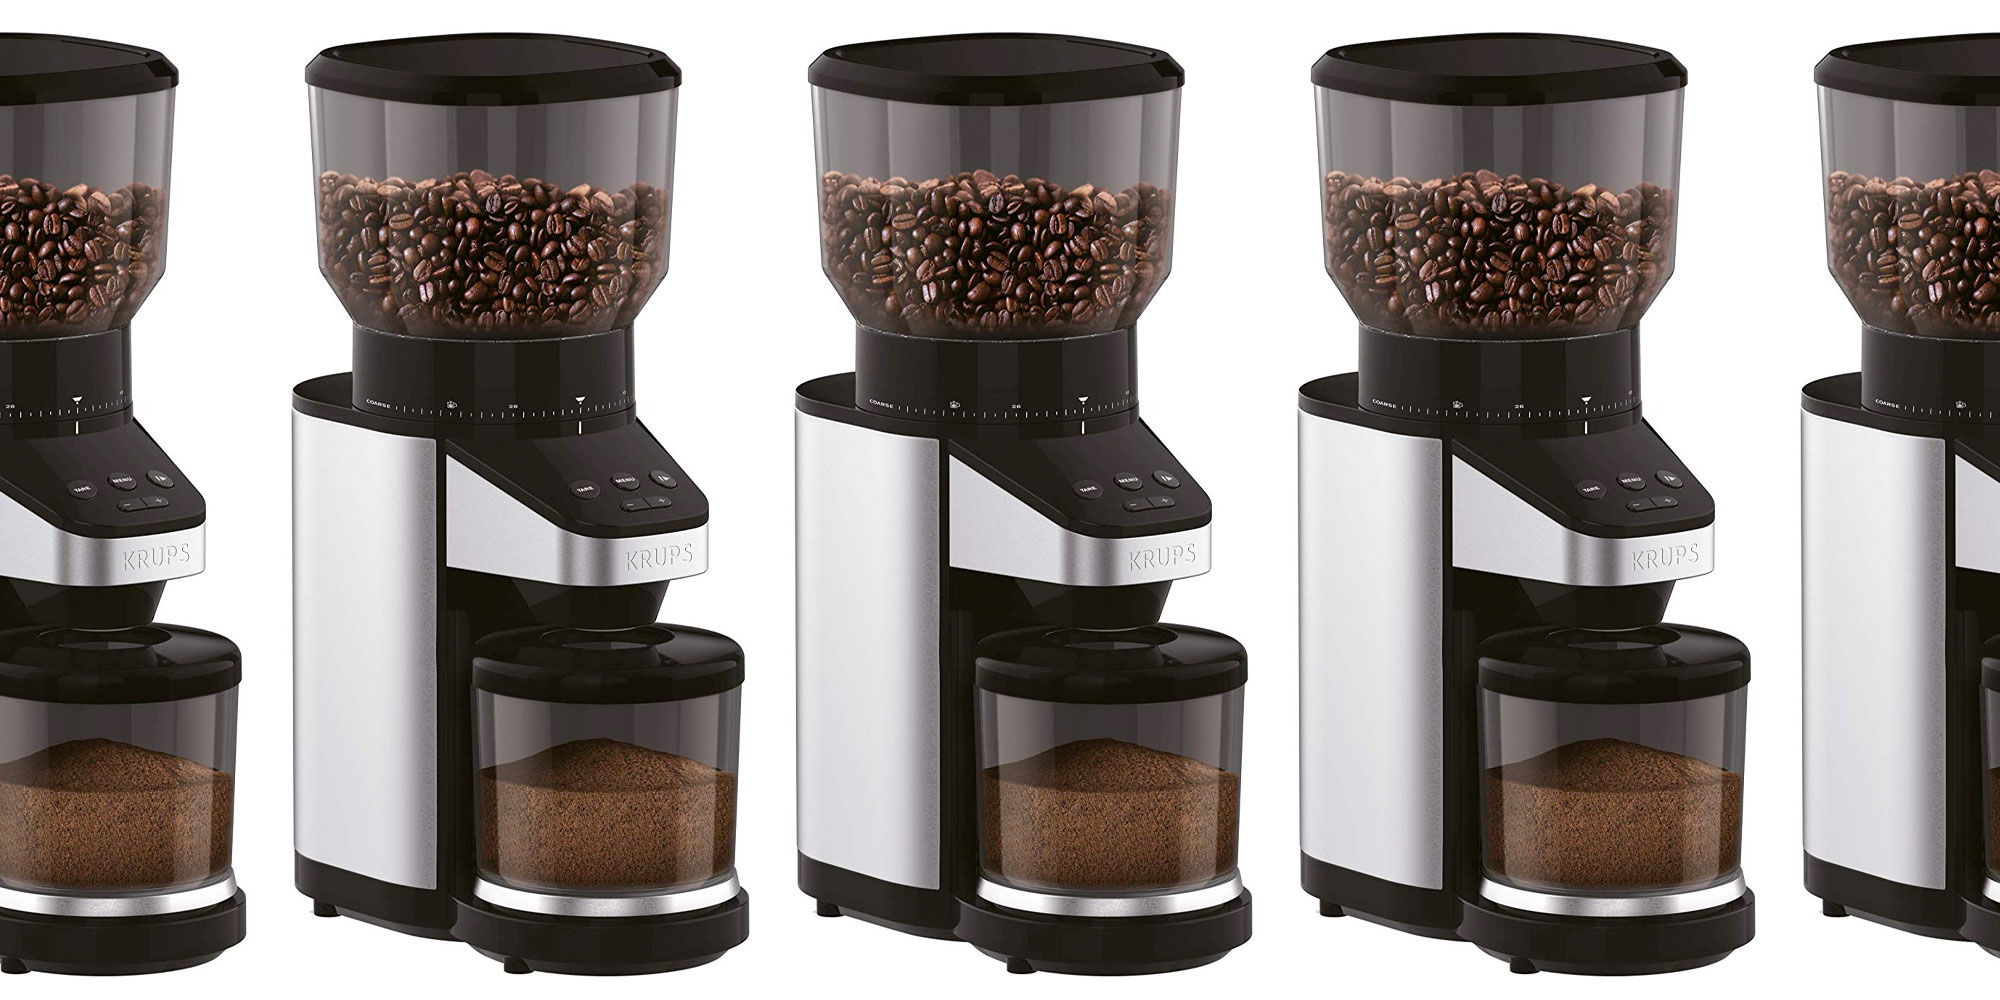 https://9to5toys.com/wp-content/uploads/sites/5/2019/03/KRUPS-Coffee-Grinder-with-Scale.jpg